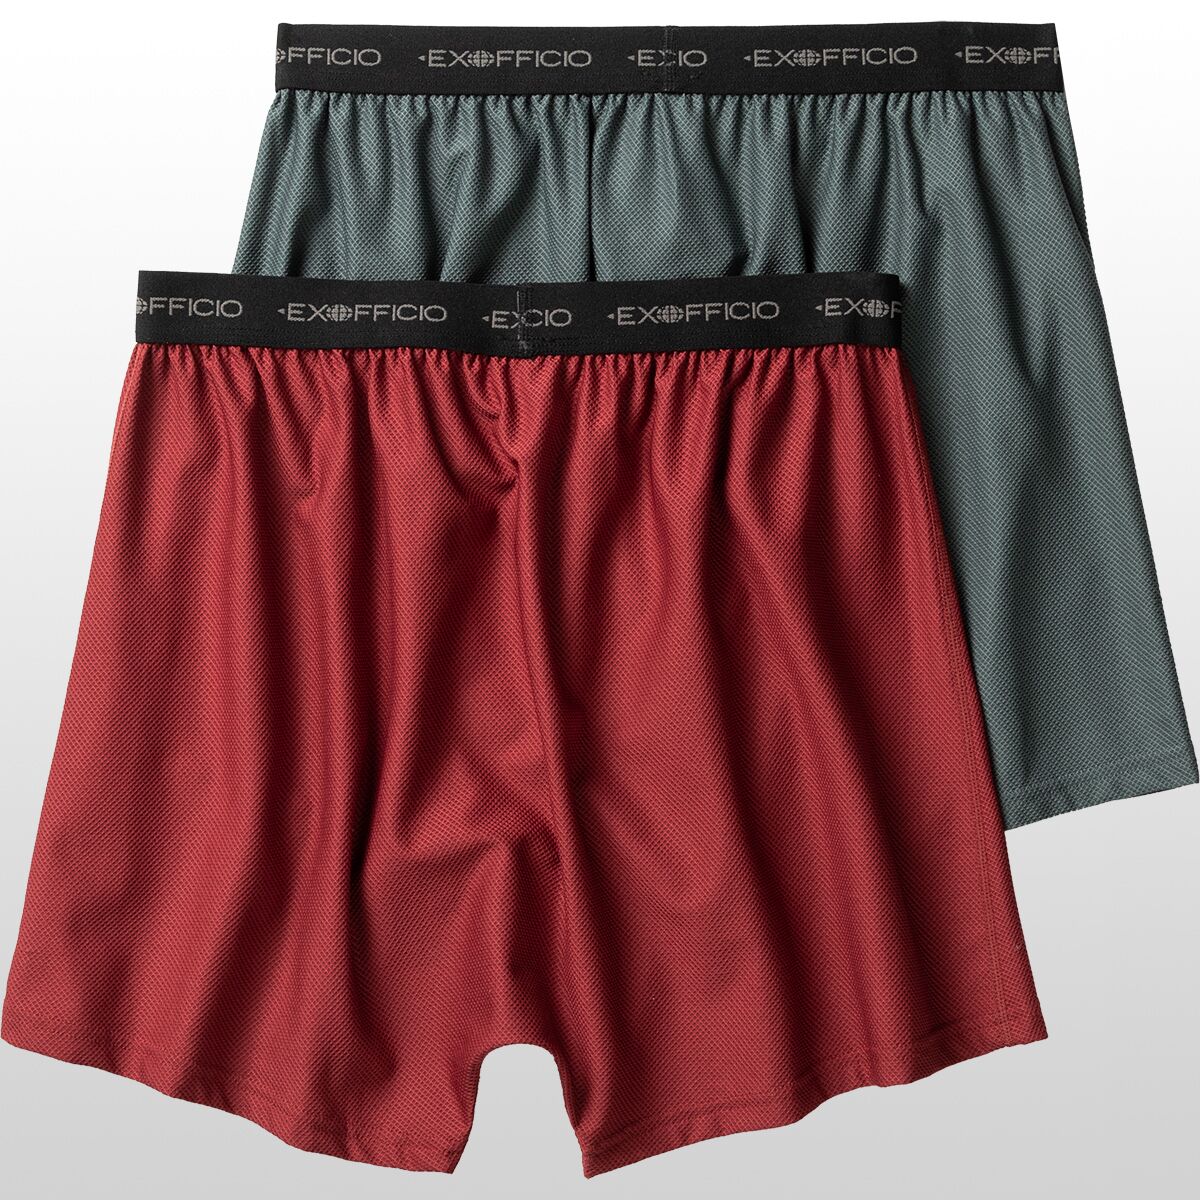 ExOfficio Men's Give-N-Go Boxer Brief 2 Pack